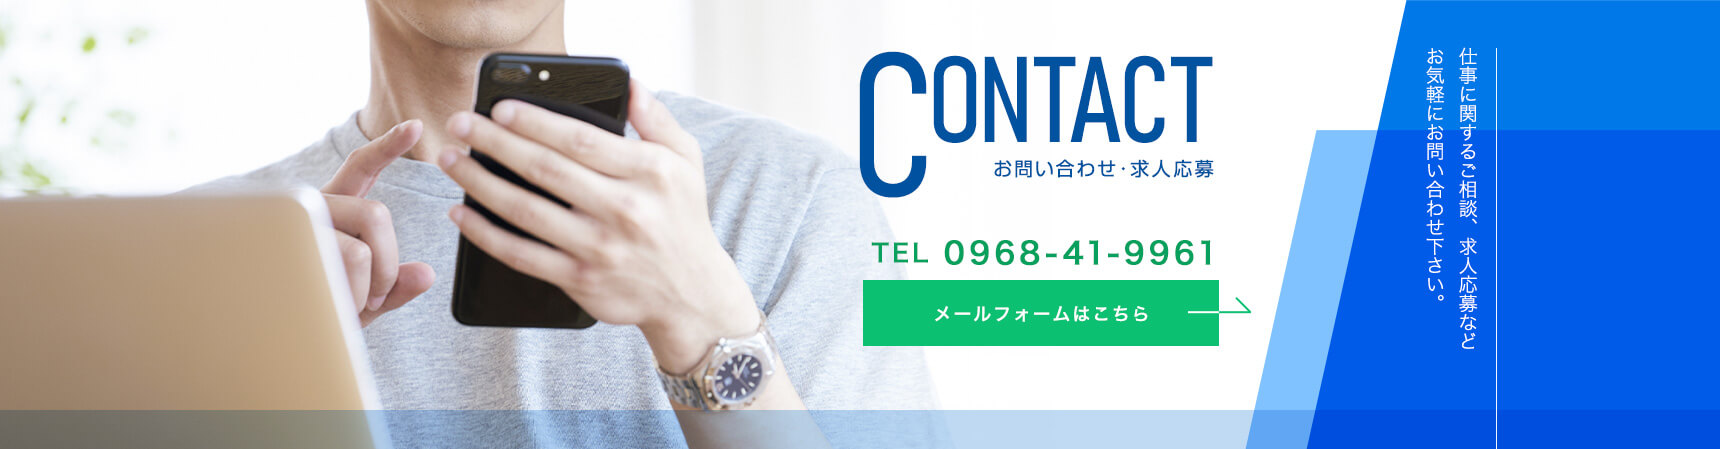 banner_contact_full